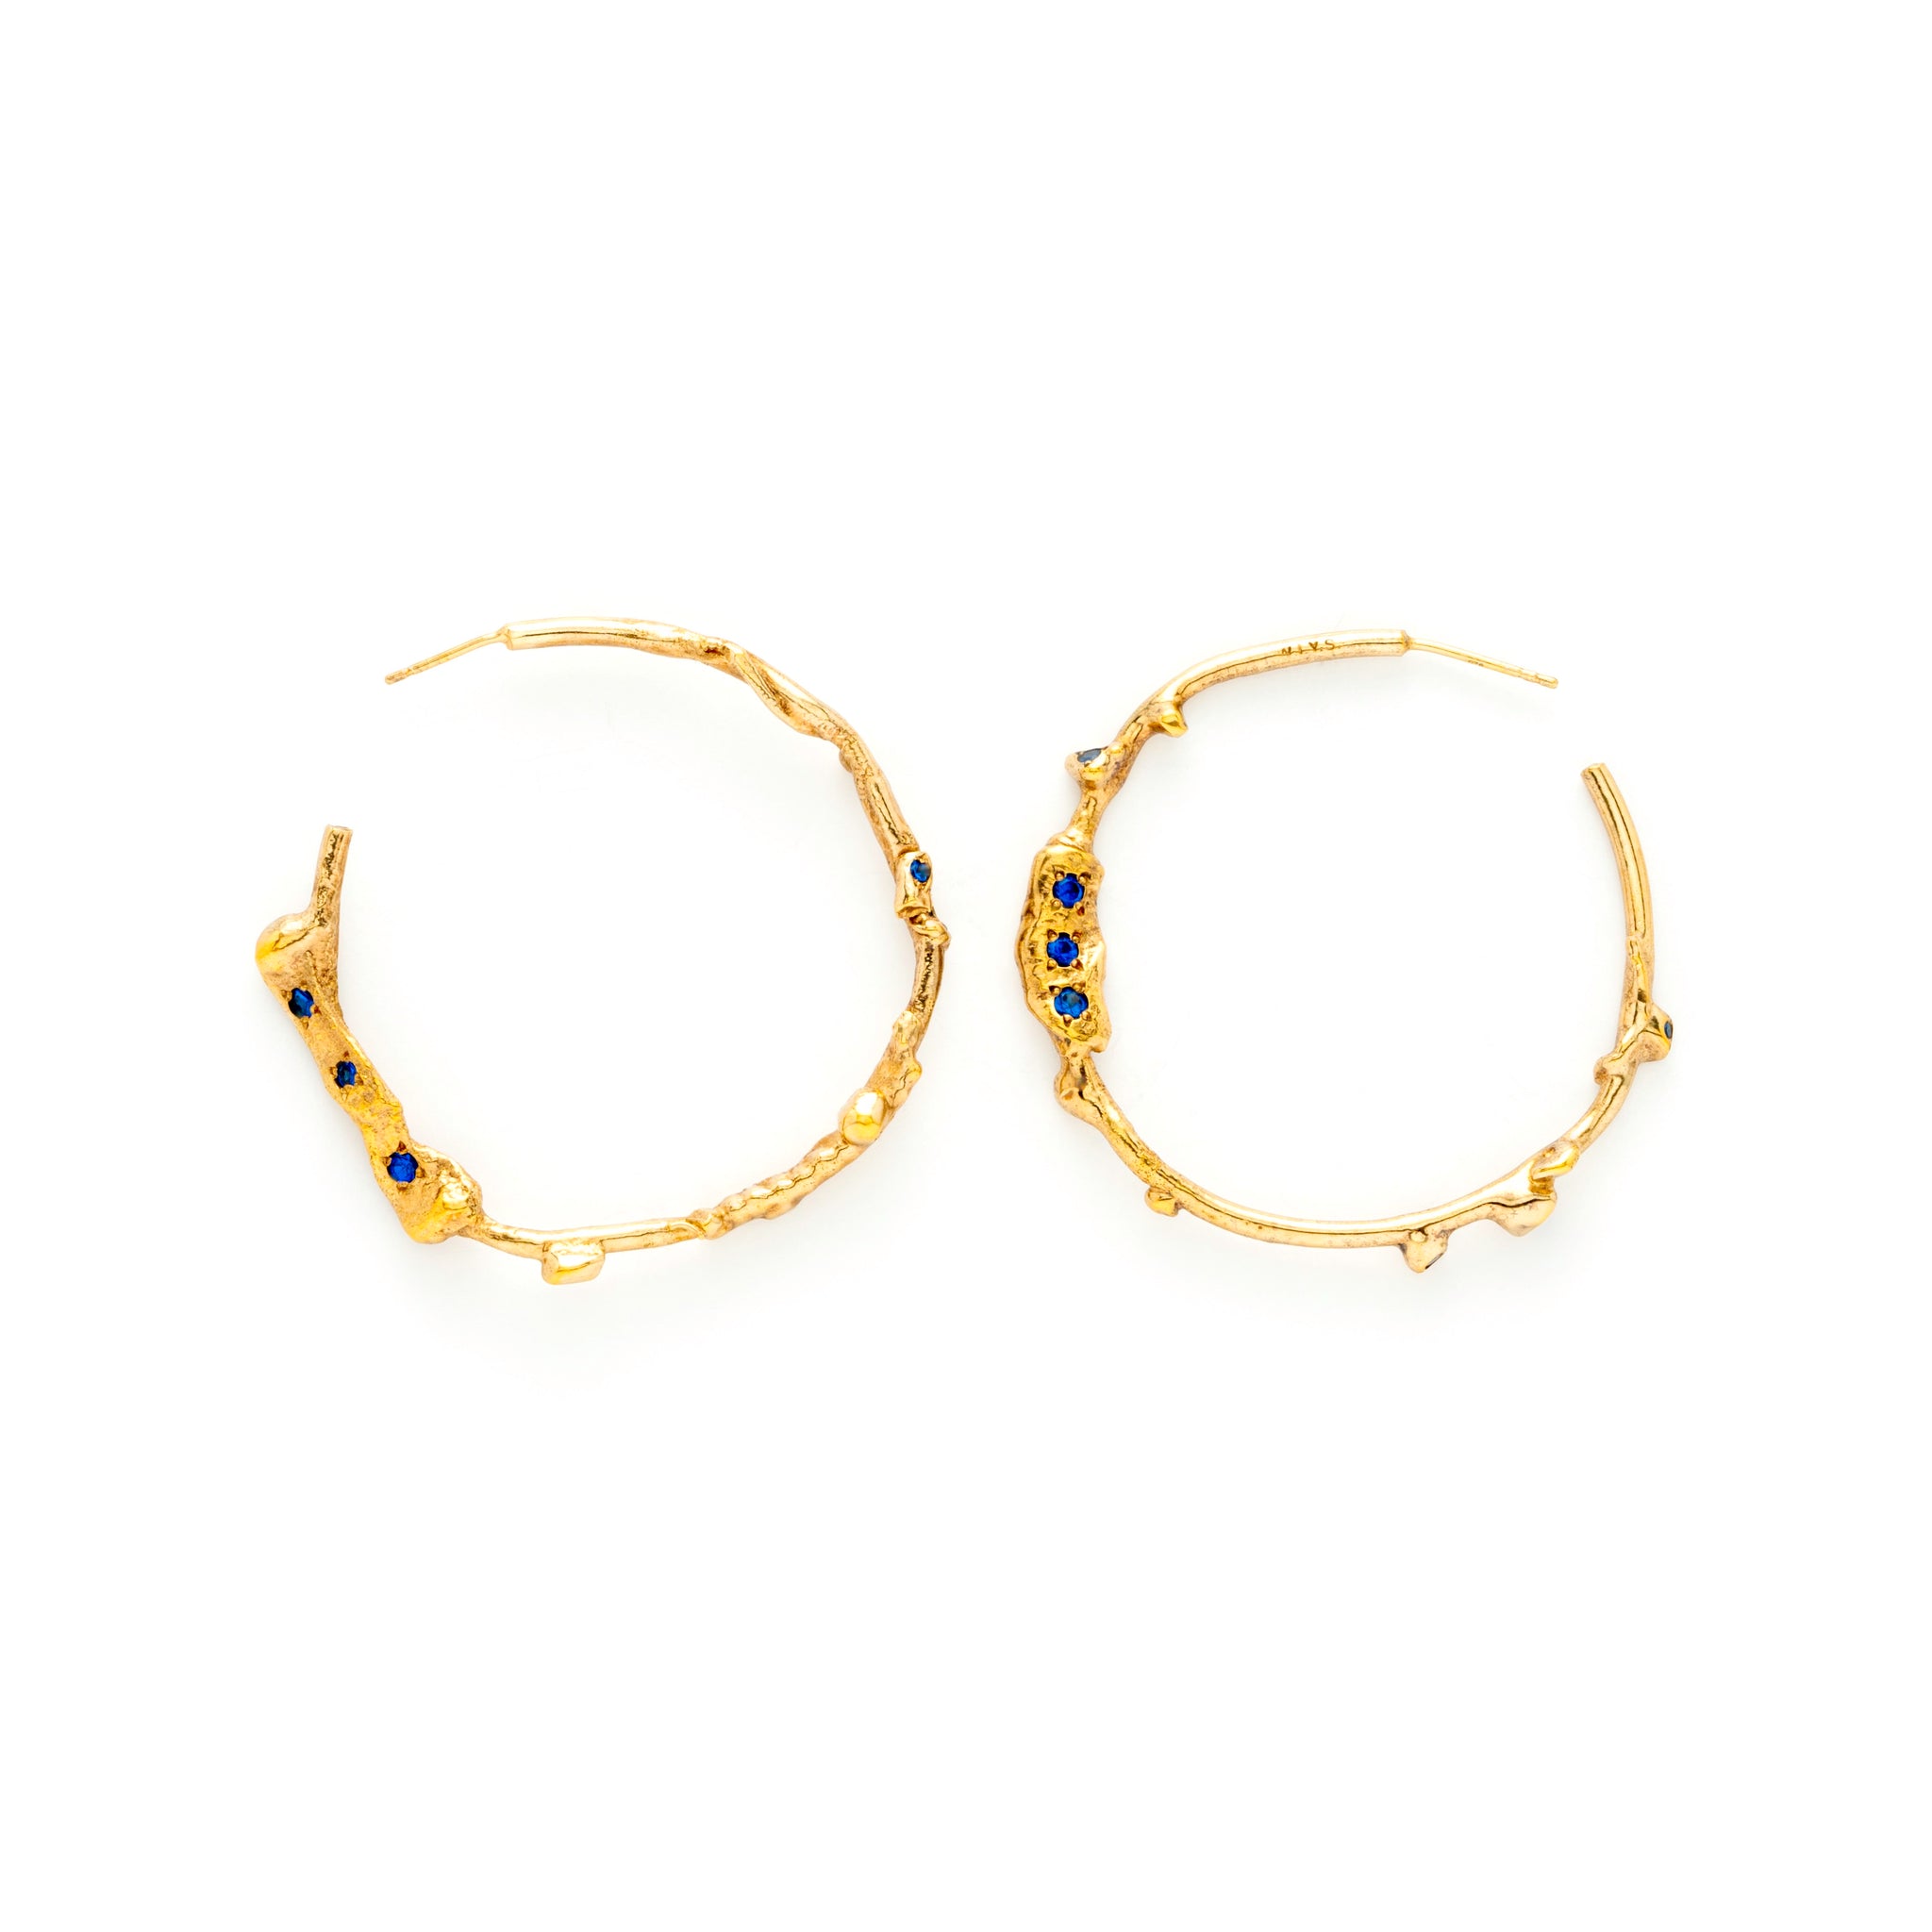 Handmade textured 14k gold earrings hoops with sapphires Taormina Earrings by What If You Stayed